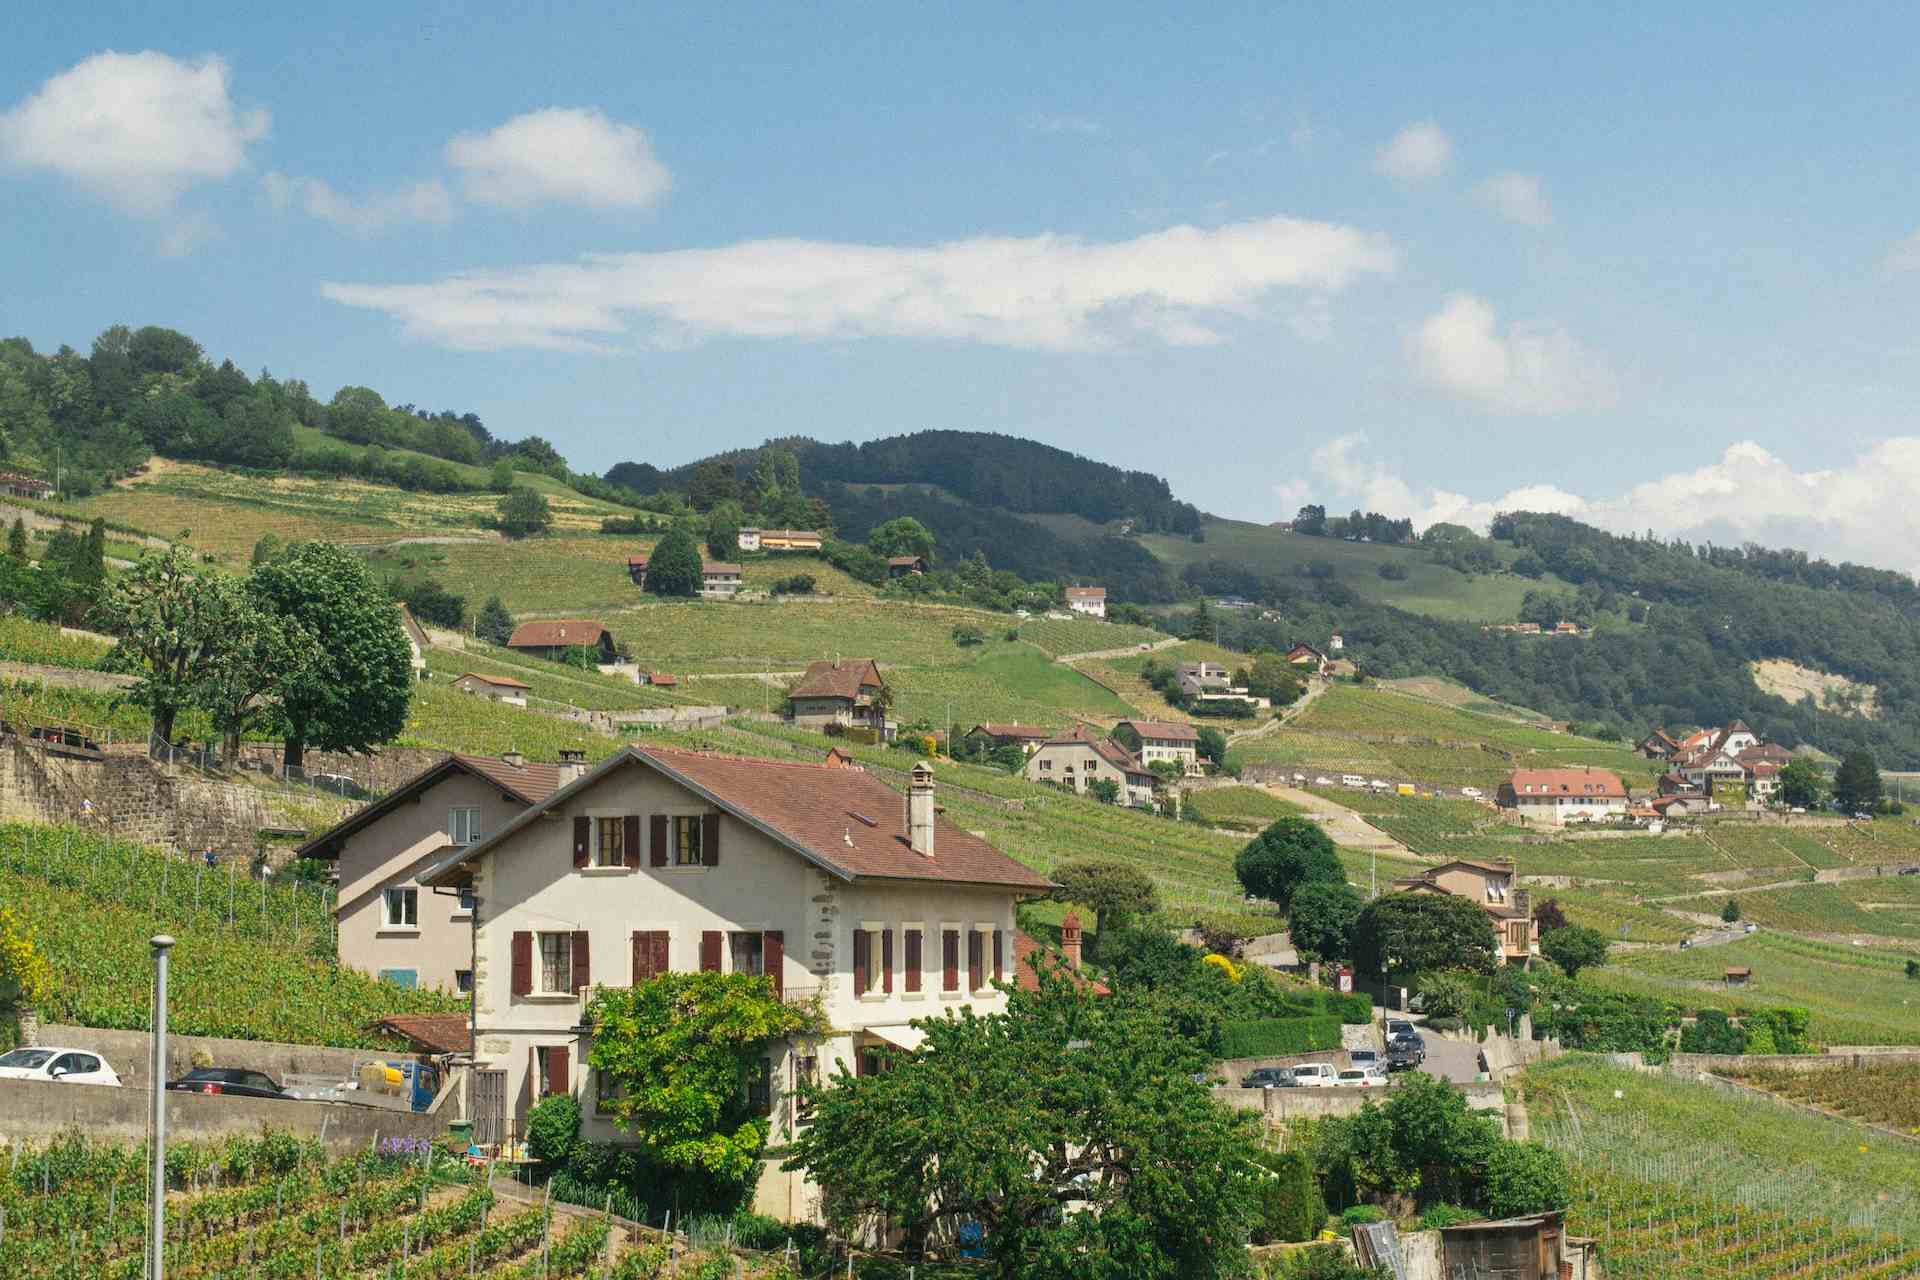 Domaine des Remans - Famille Rossier, producer in Lavigny canton of Vaud in Switzerland, | Mimelis